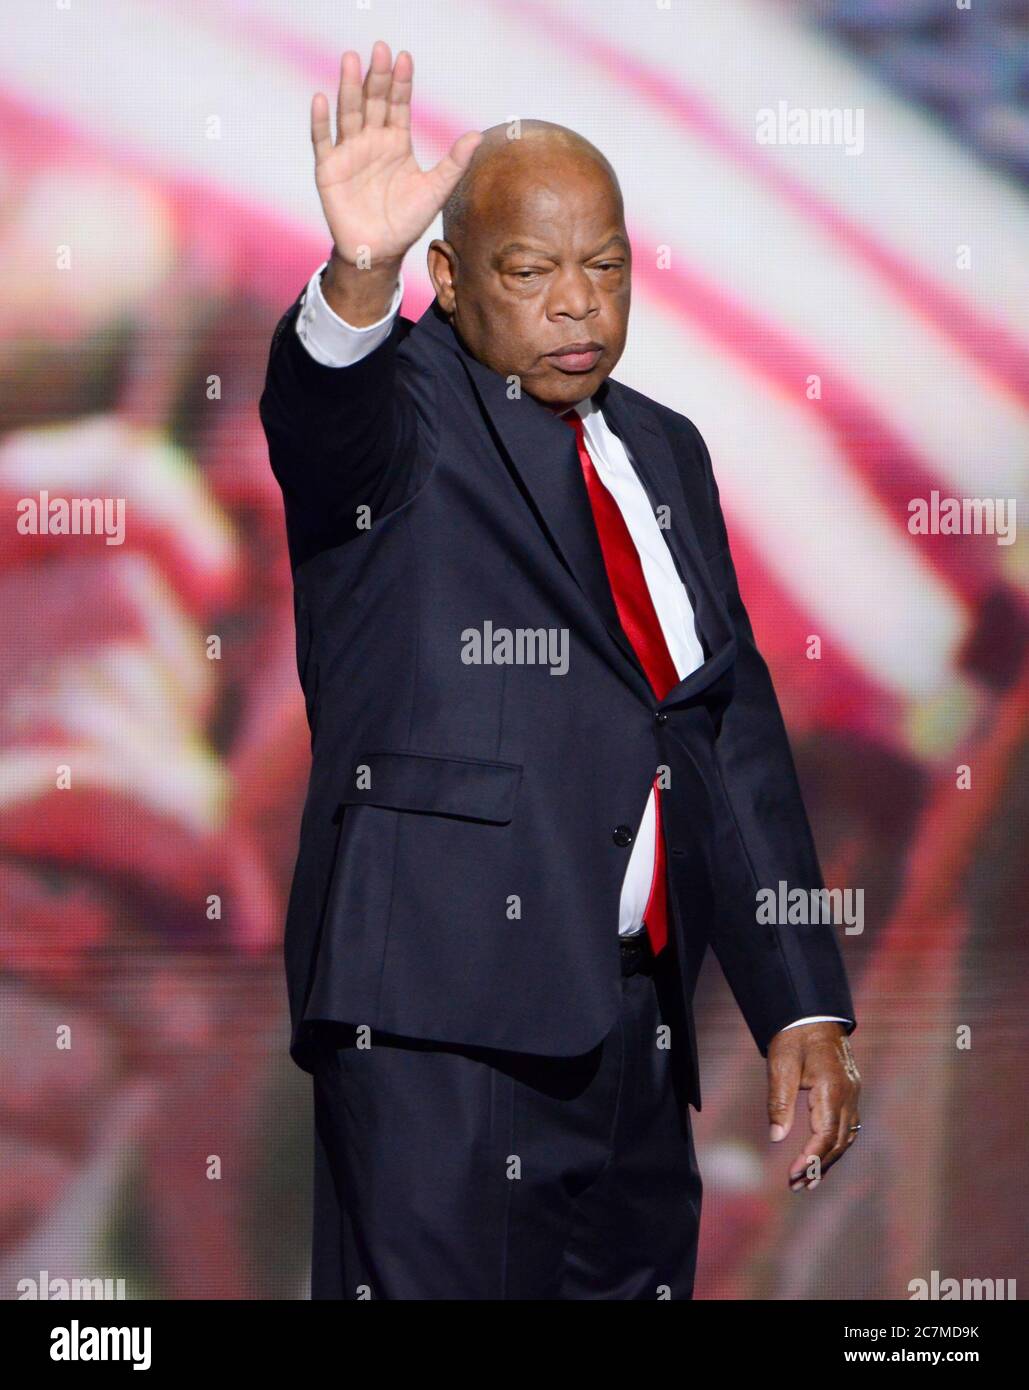 United States Representative John Lewis (Democrat of Georgia) makes remarks at the 2012 Democratic National Convention in Charlotte, North Carolina on Thursday, September 6, 2012. Credit: Ron Sachs/CNP.(RESTRICTION: NO New York or New Jersey Newspapers or newspapers within a 75 mile radius of New York City) /MediaPunch Stock Photo